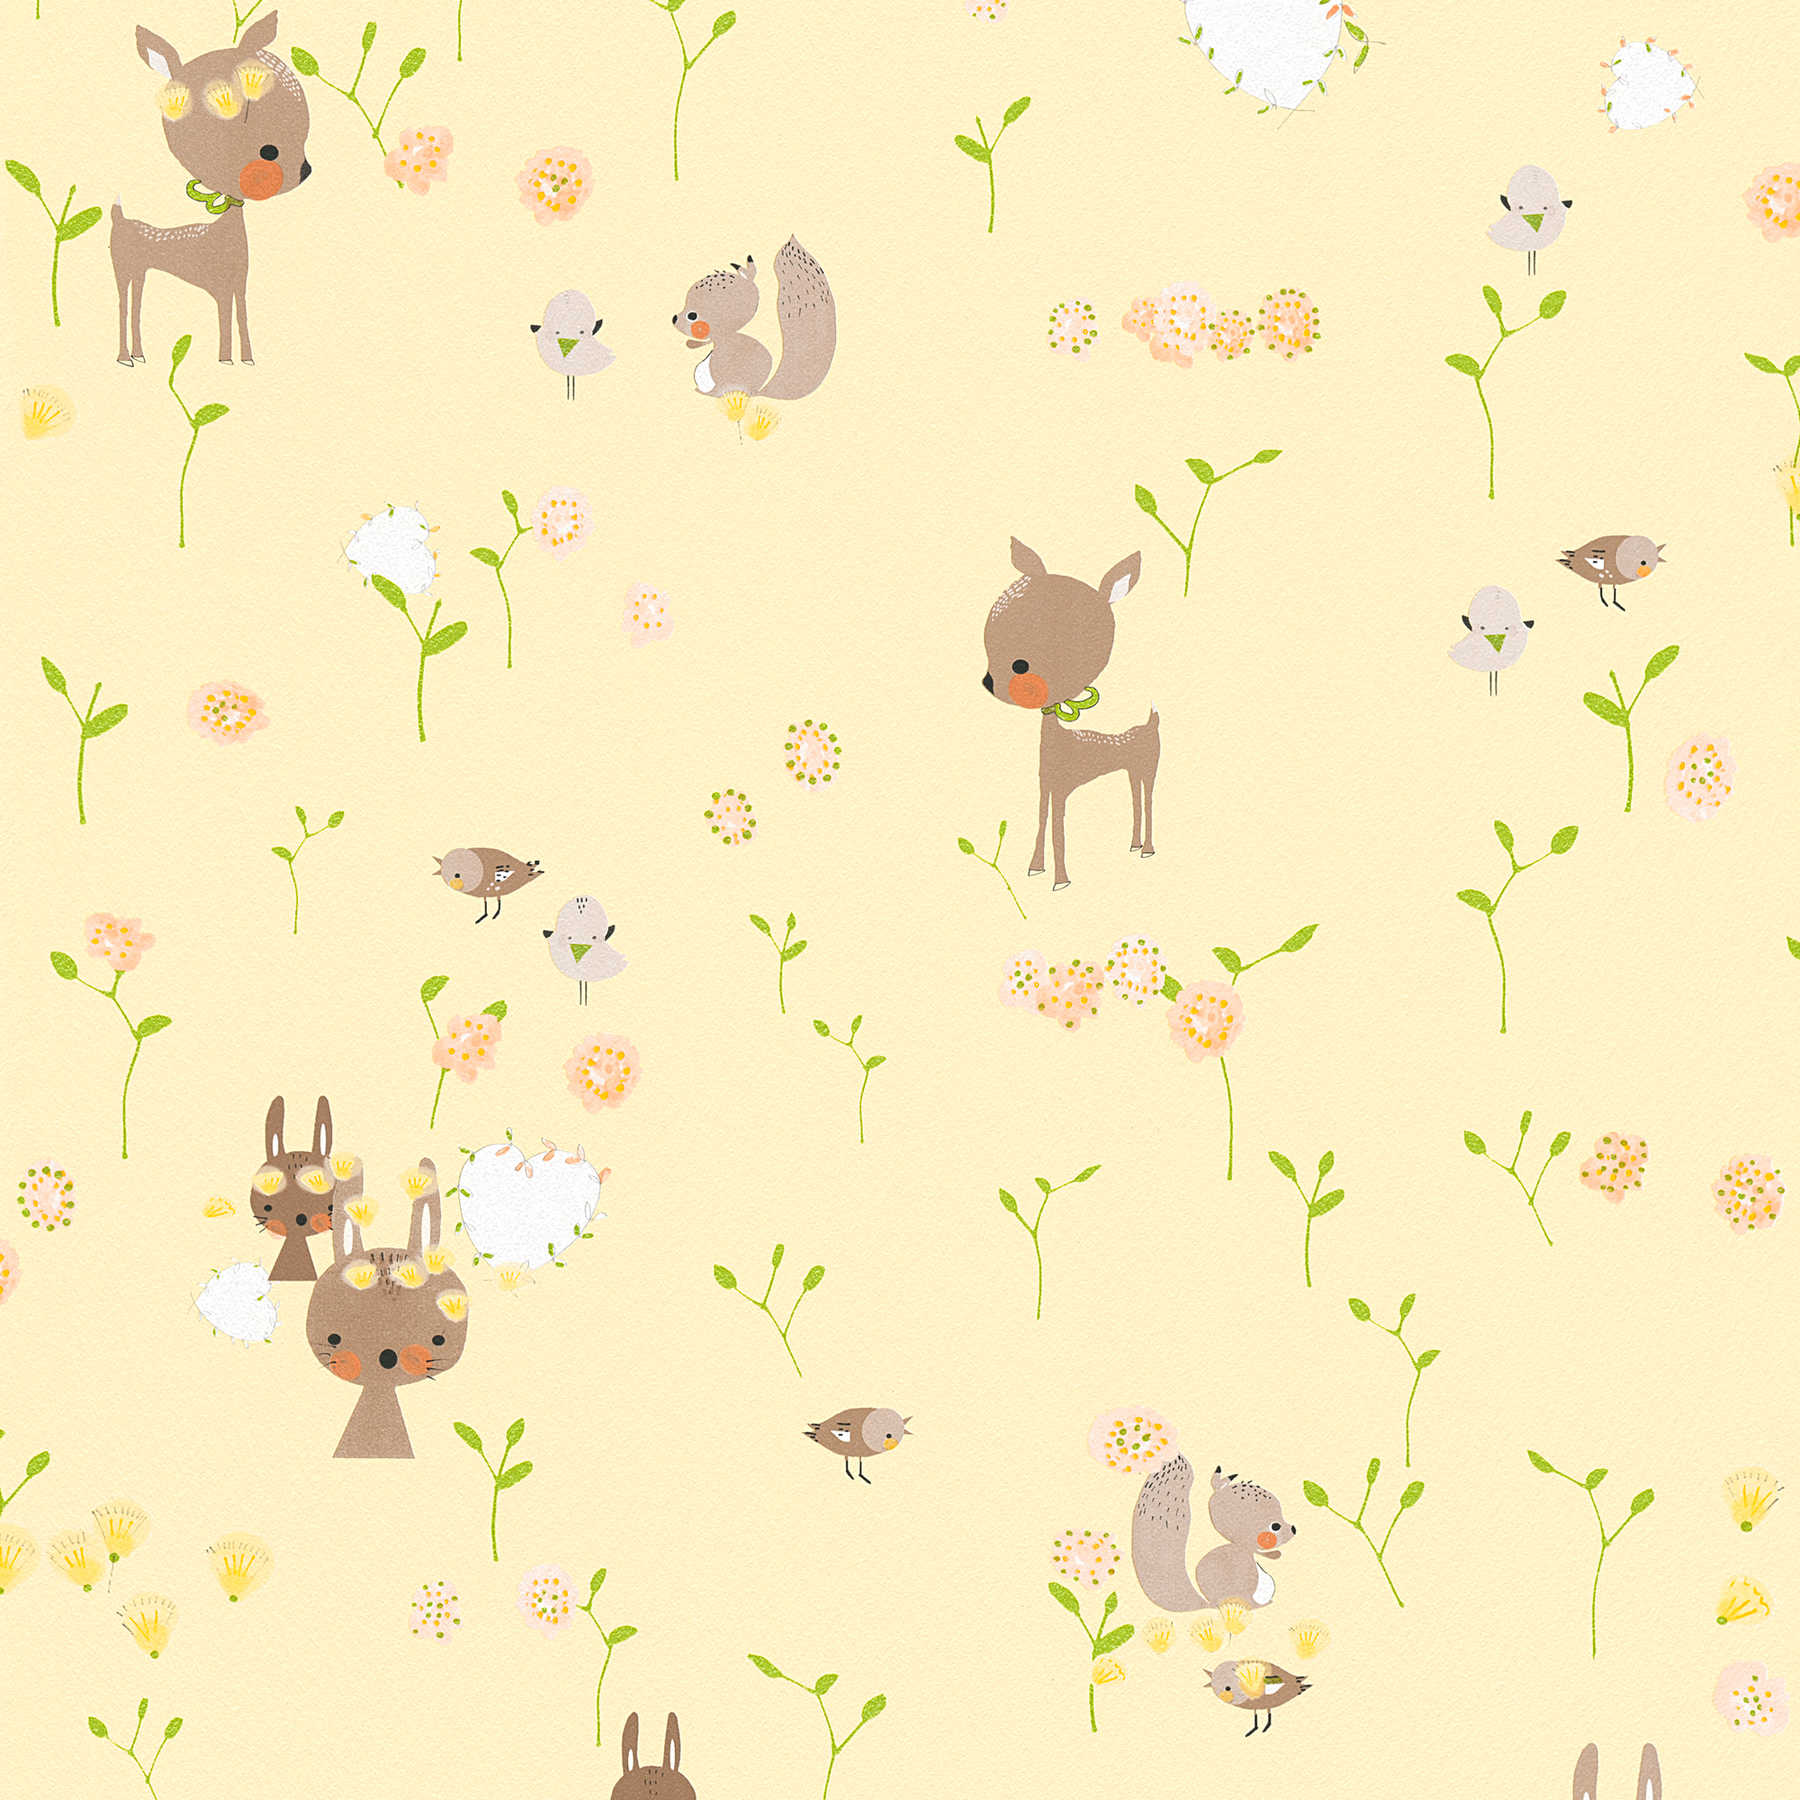 Wallpaper with forest animals for baby & Nursery - yellow, green
